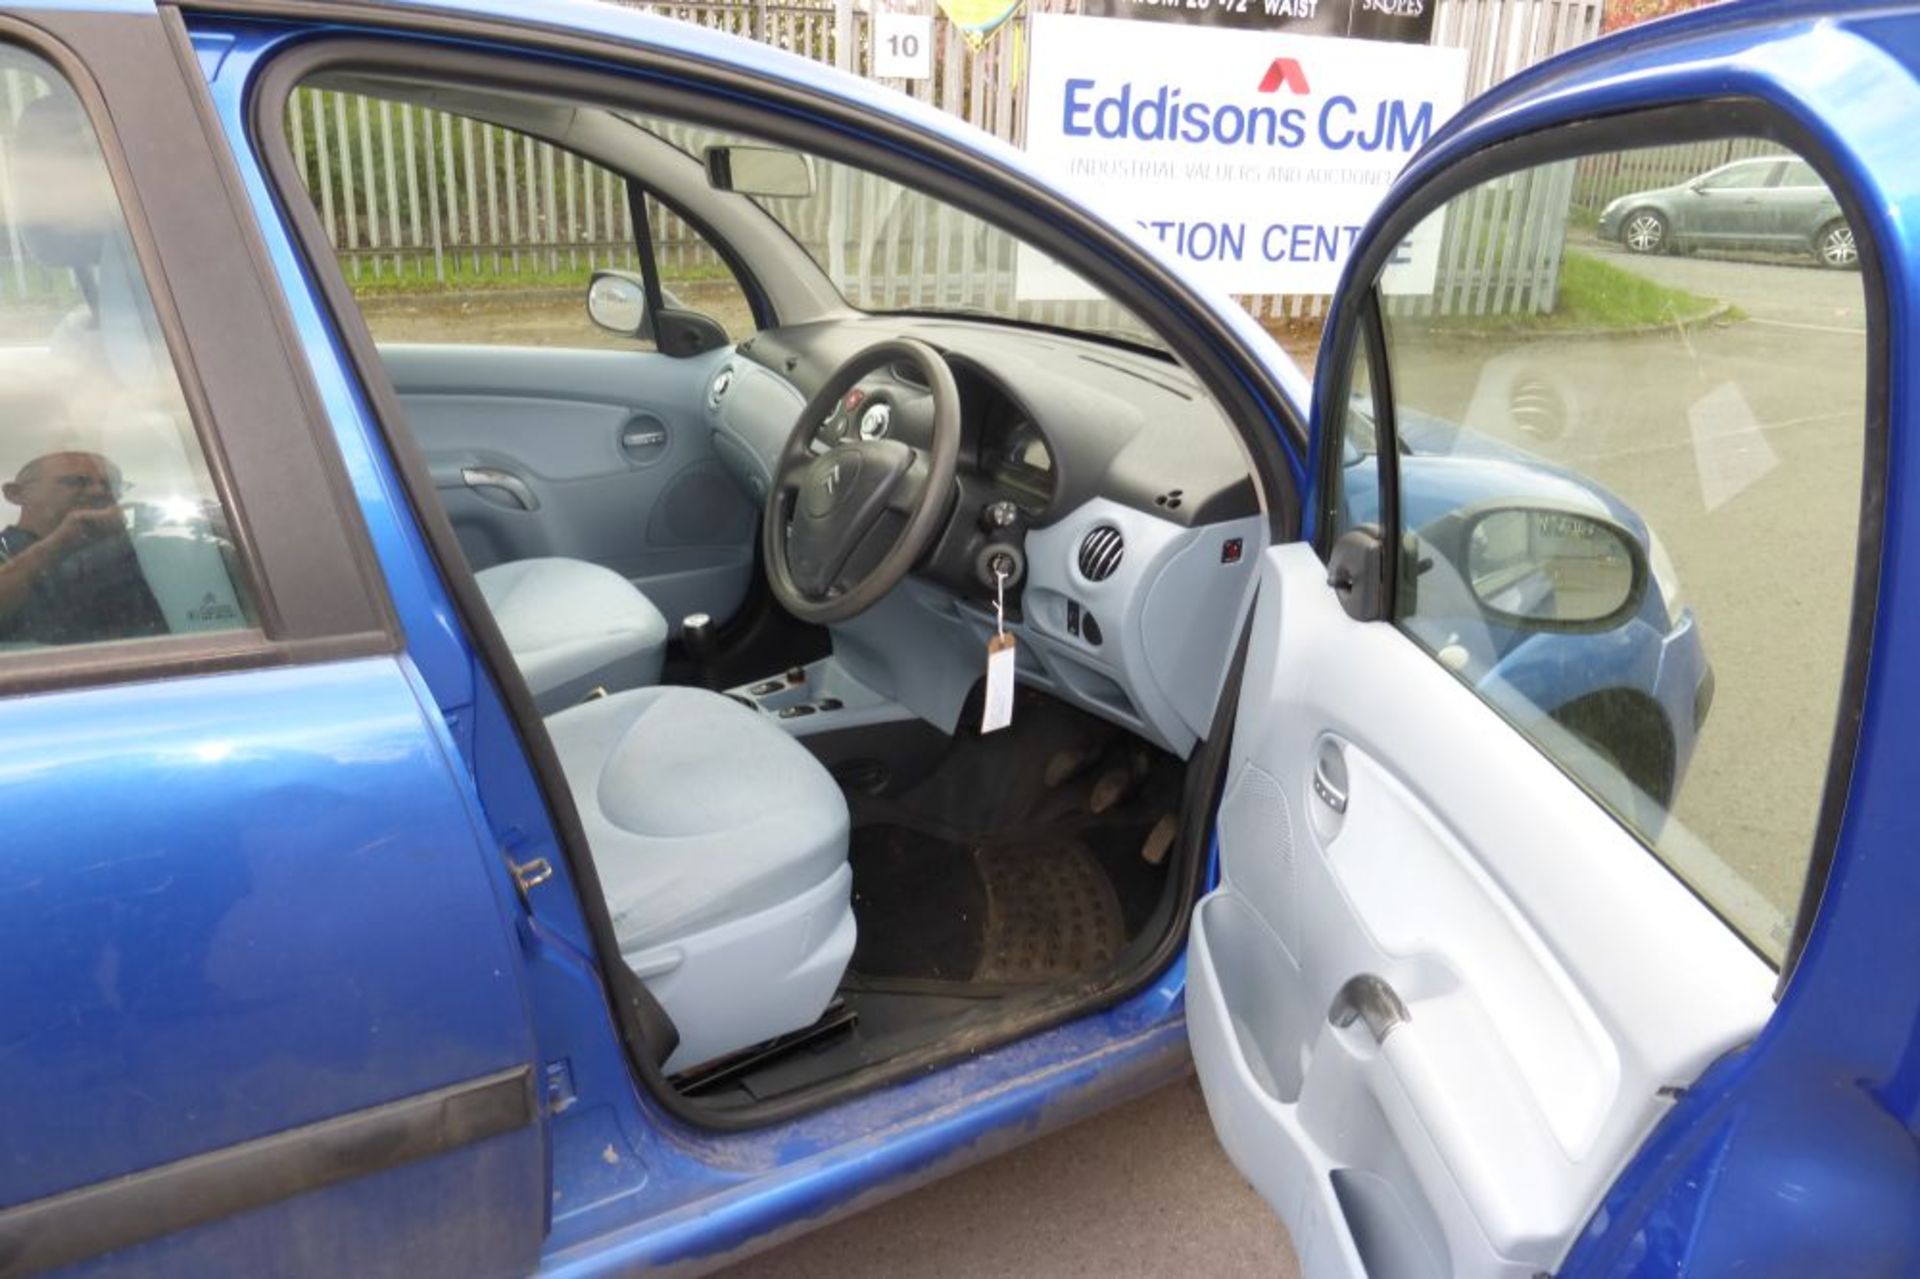 A Citroen C3 LX 1360cc Petrol, Date of First Registration 30.06.2003 comes with V5, 1 Key and - Bild 7 aus 11